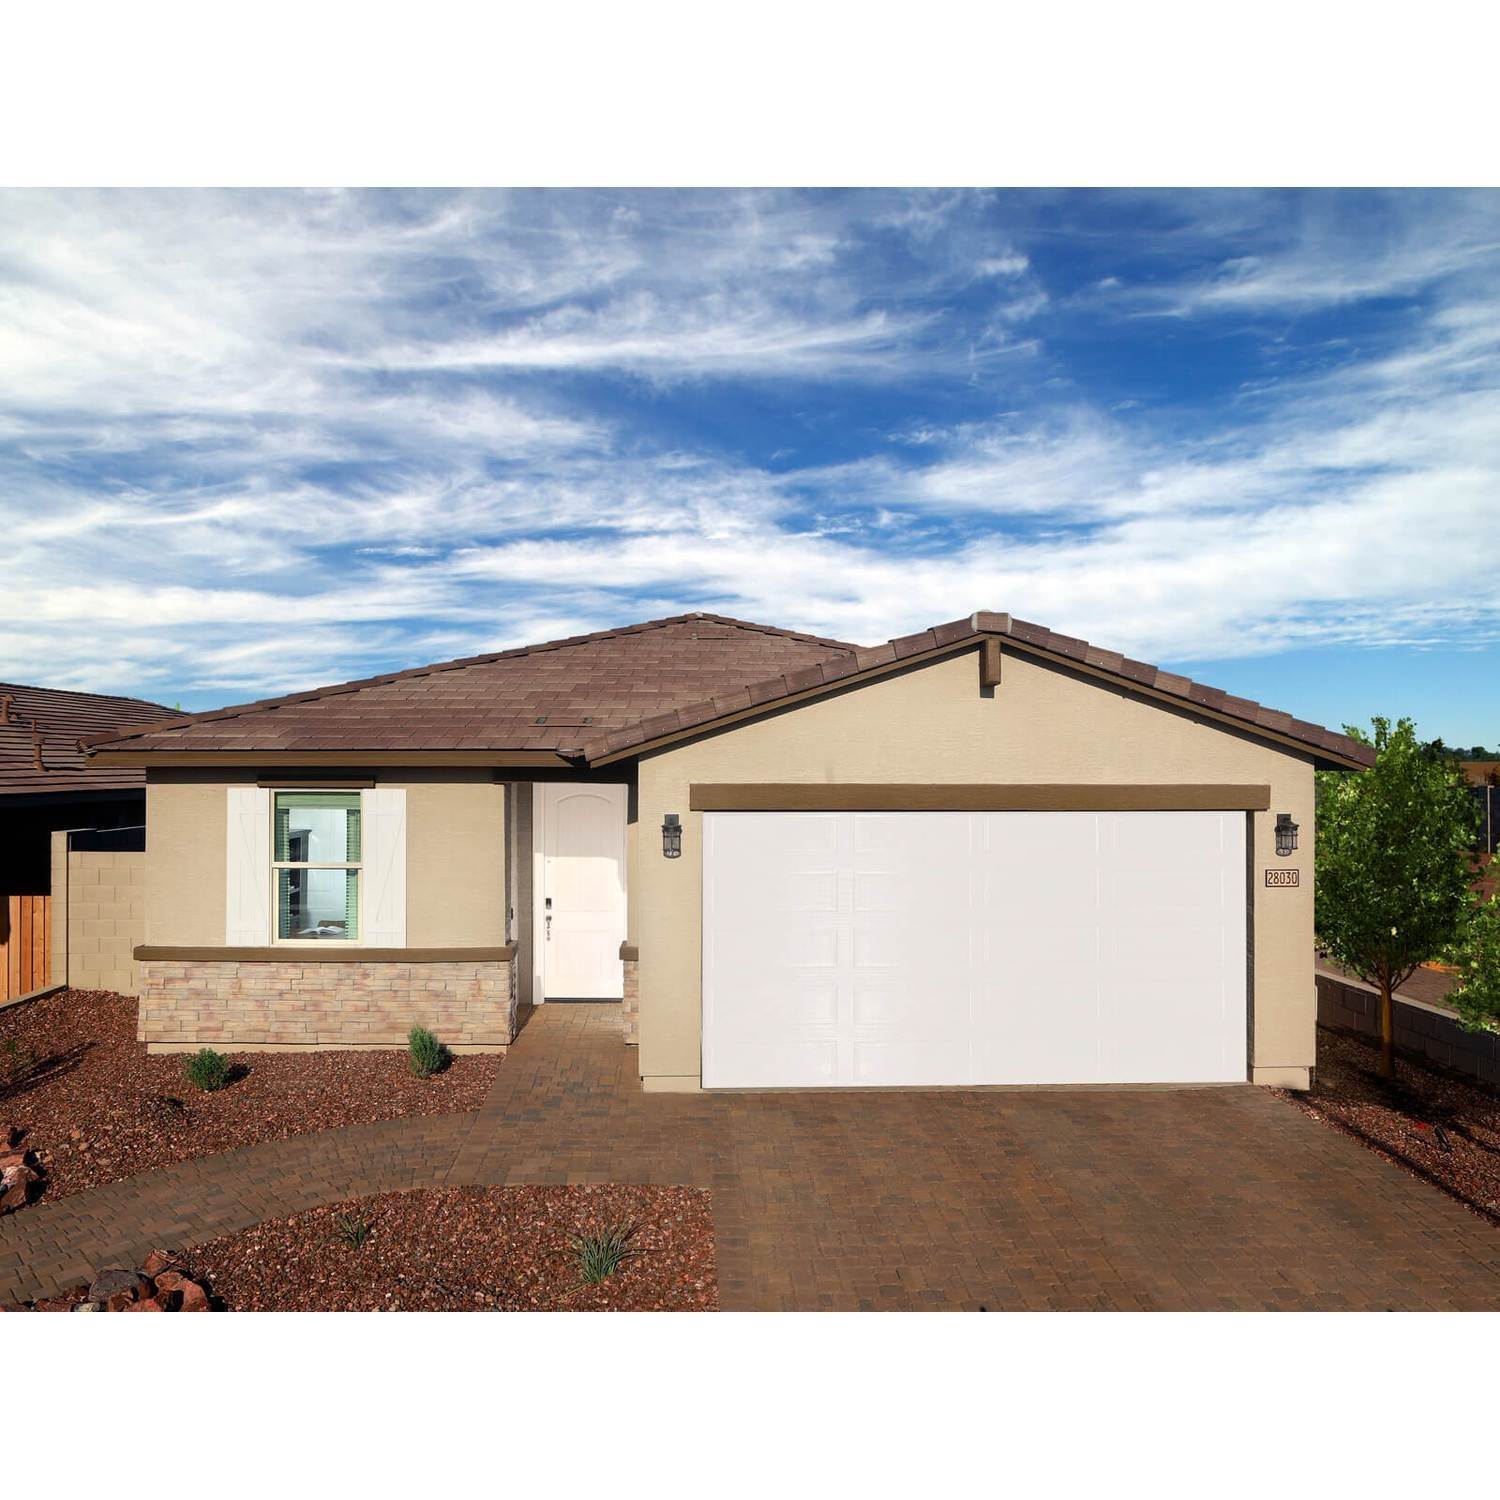 Single Family for Sale at The Enclave On Olive 22474 W Yavapai Street, Waddell, AZ 85355